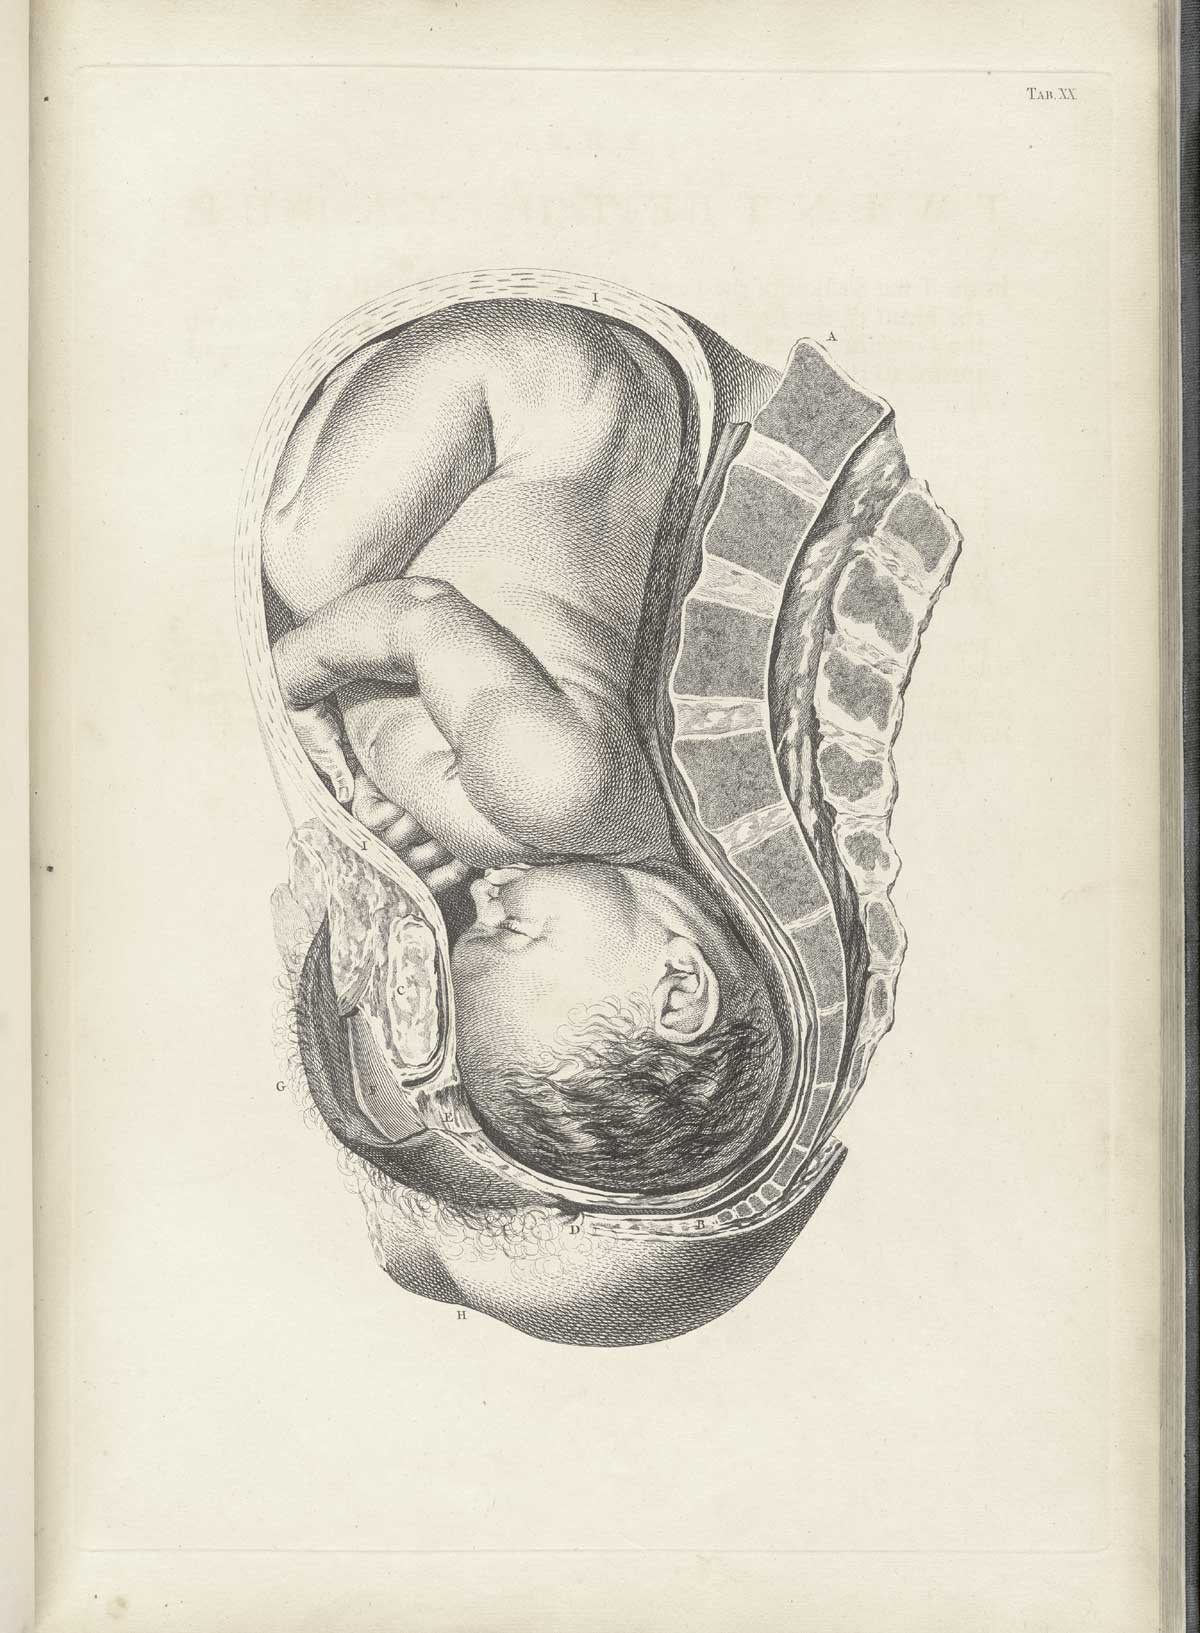 Table 20 of William Smellie's A sett of anatomical tables, with explanations, and an abridgment, of the practice of midwifery, featuring the illustrated drawing of a woman's uterus with a fetus resting against the spine.